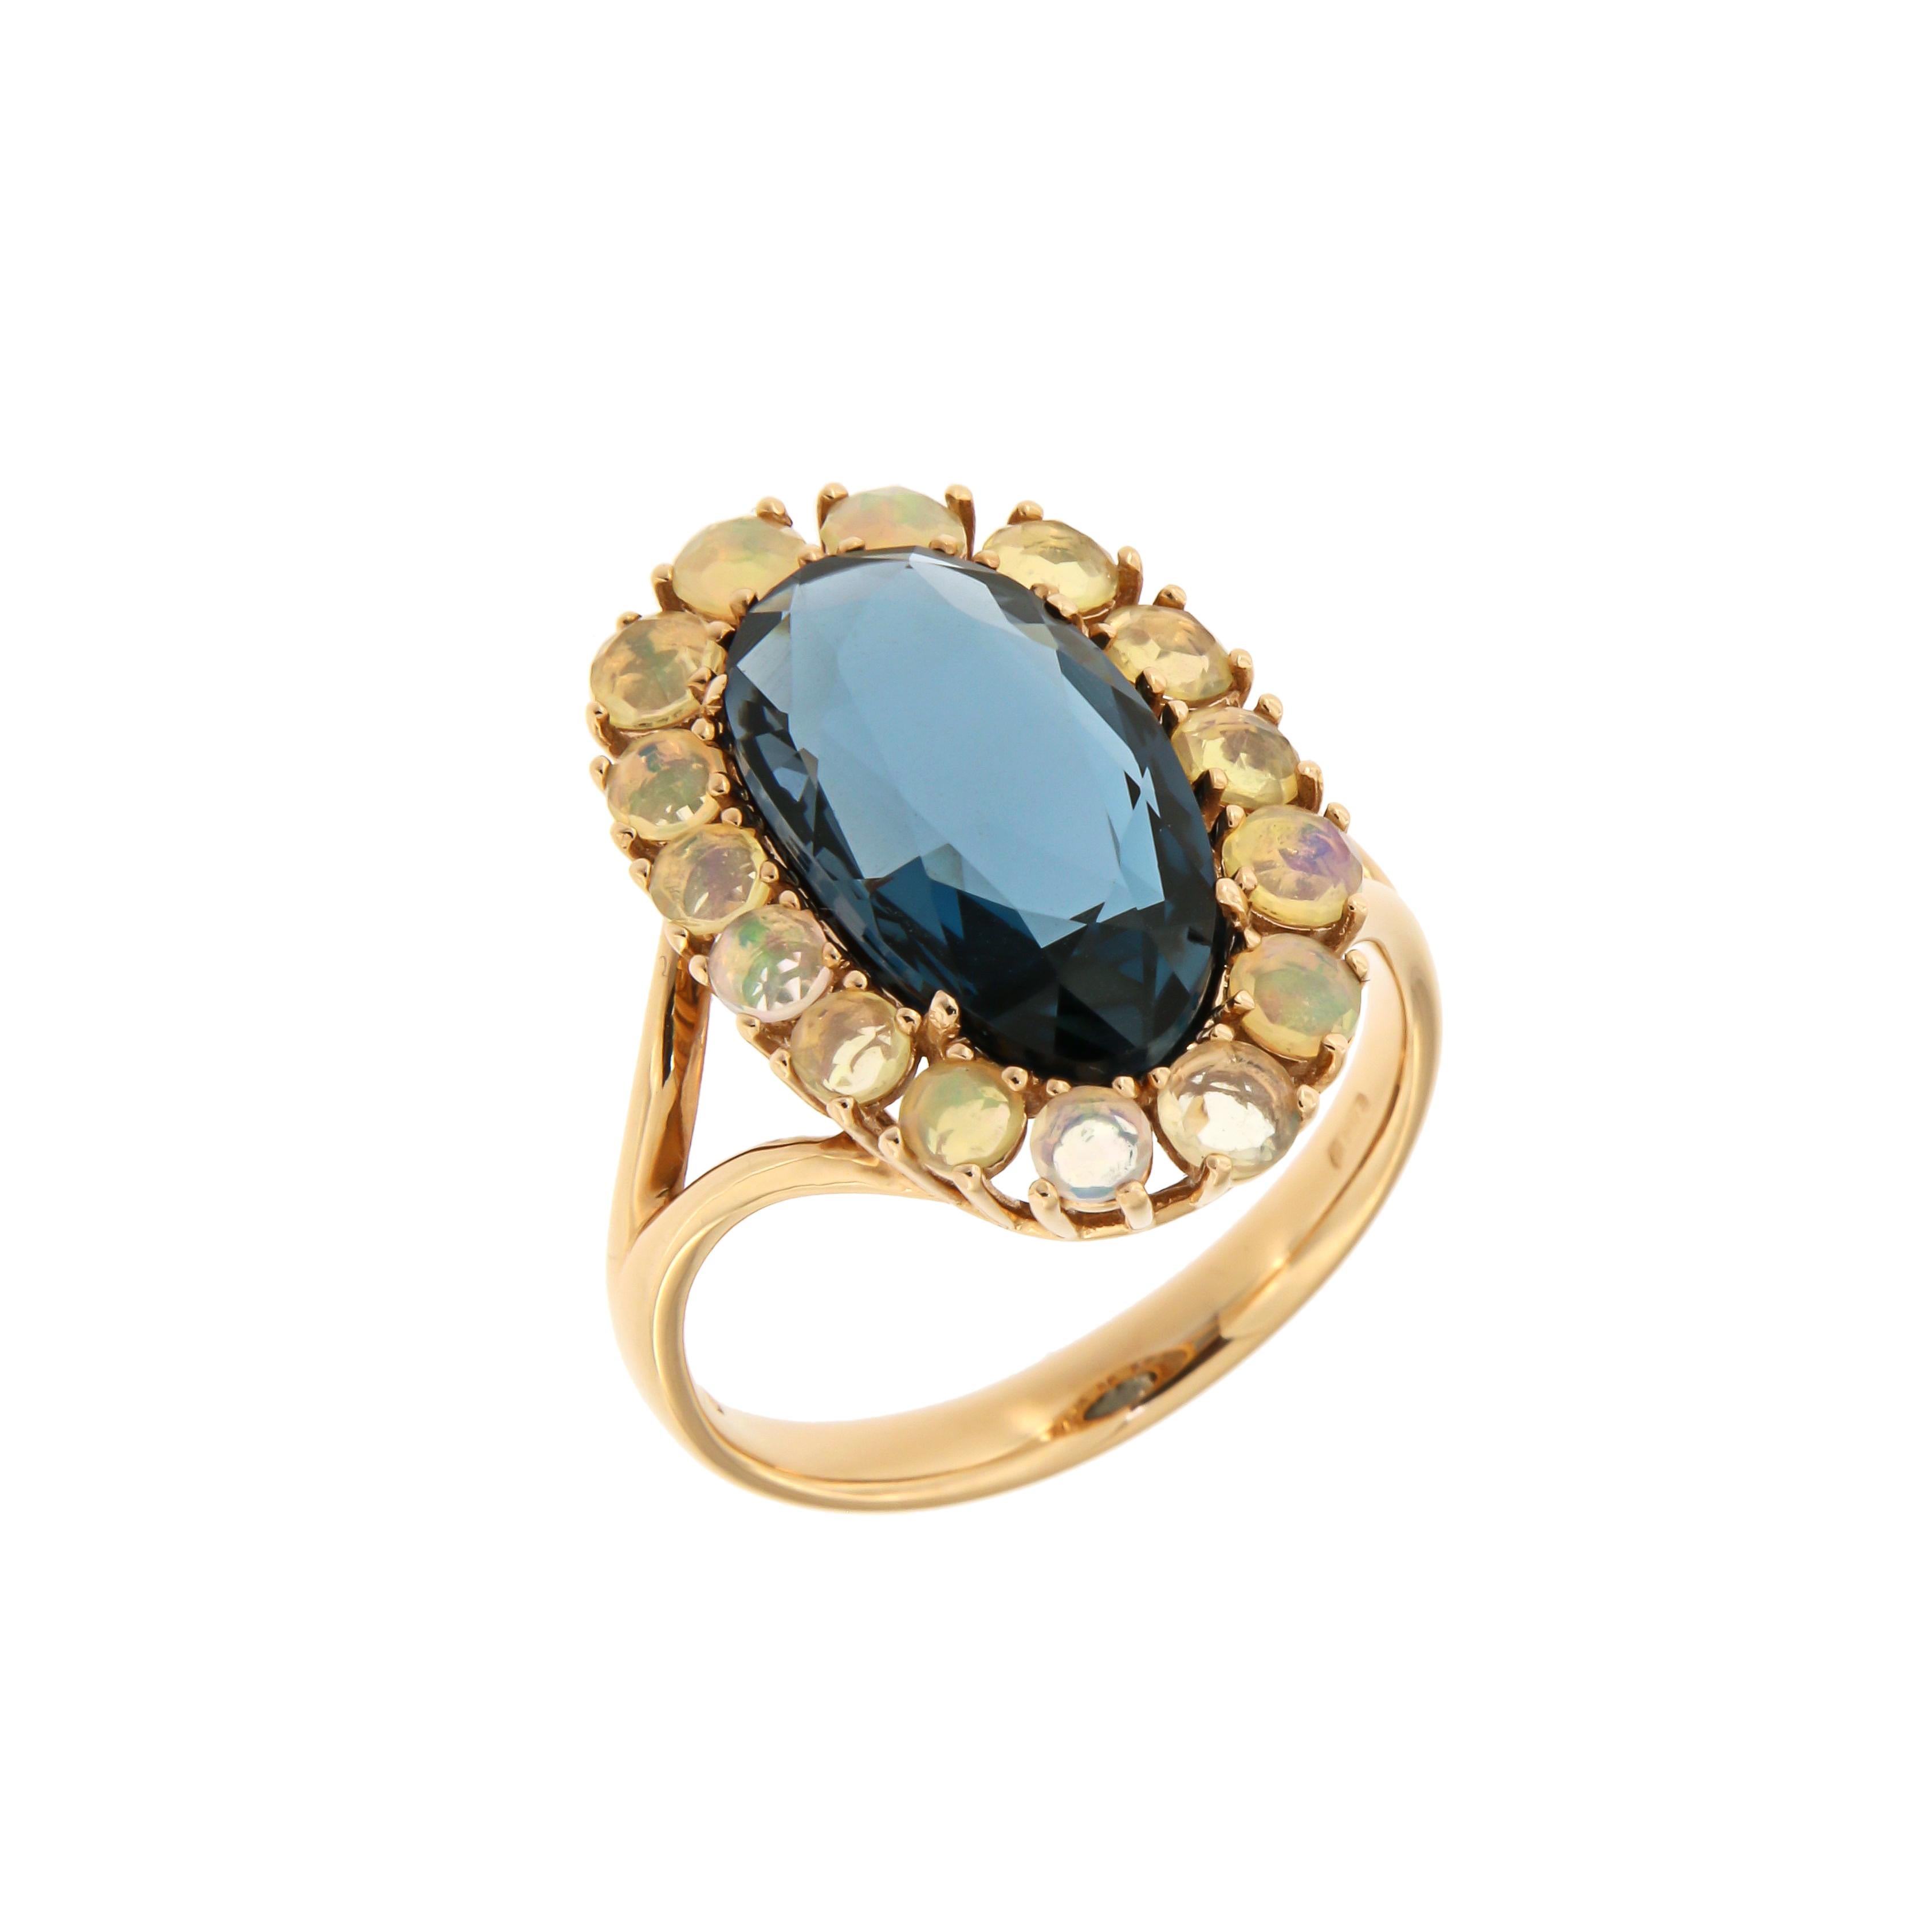 Ring Rose Gold 18 K
London blue topaz 4,79ct
Opal 

Weight 5 grams
Different Sizes Available

With a heritage of ancient fine Swiss jewelry traditions, NATKINA is a Geneva based jewellery brand, which creates modern jewellery masterpieces suitable